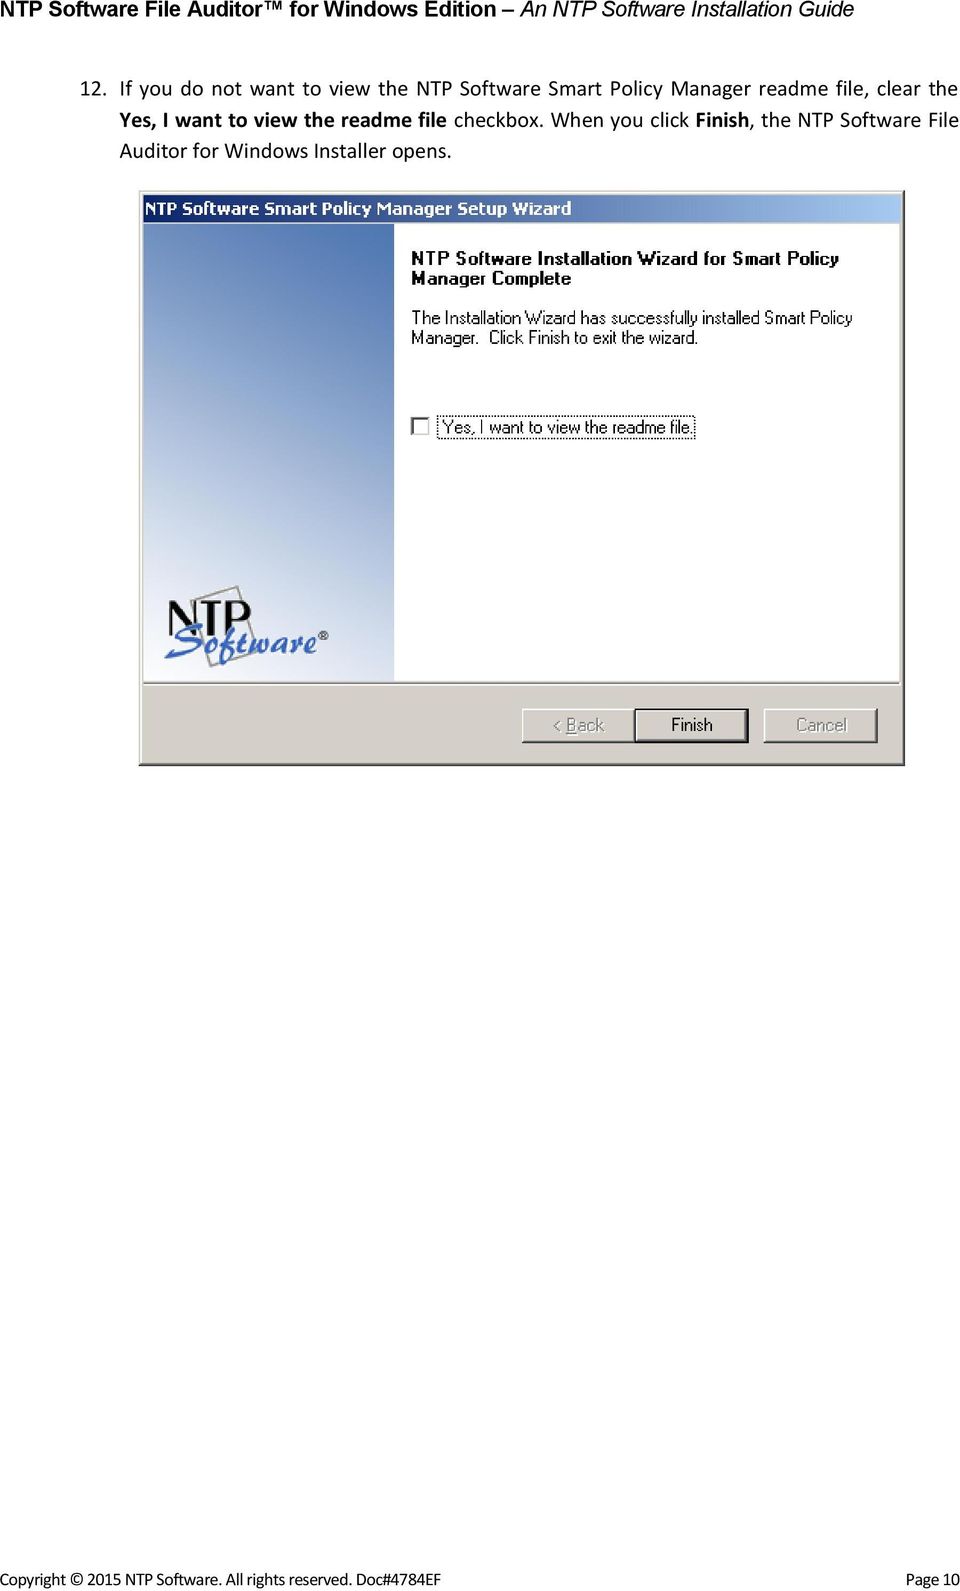 When you click Finish, the NTP Software File Auditor for Windows